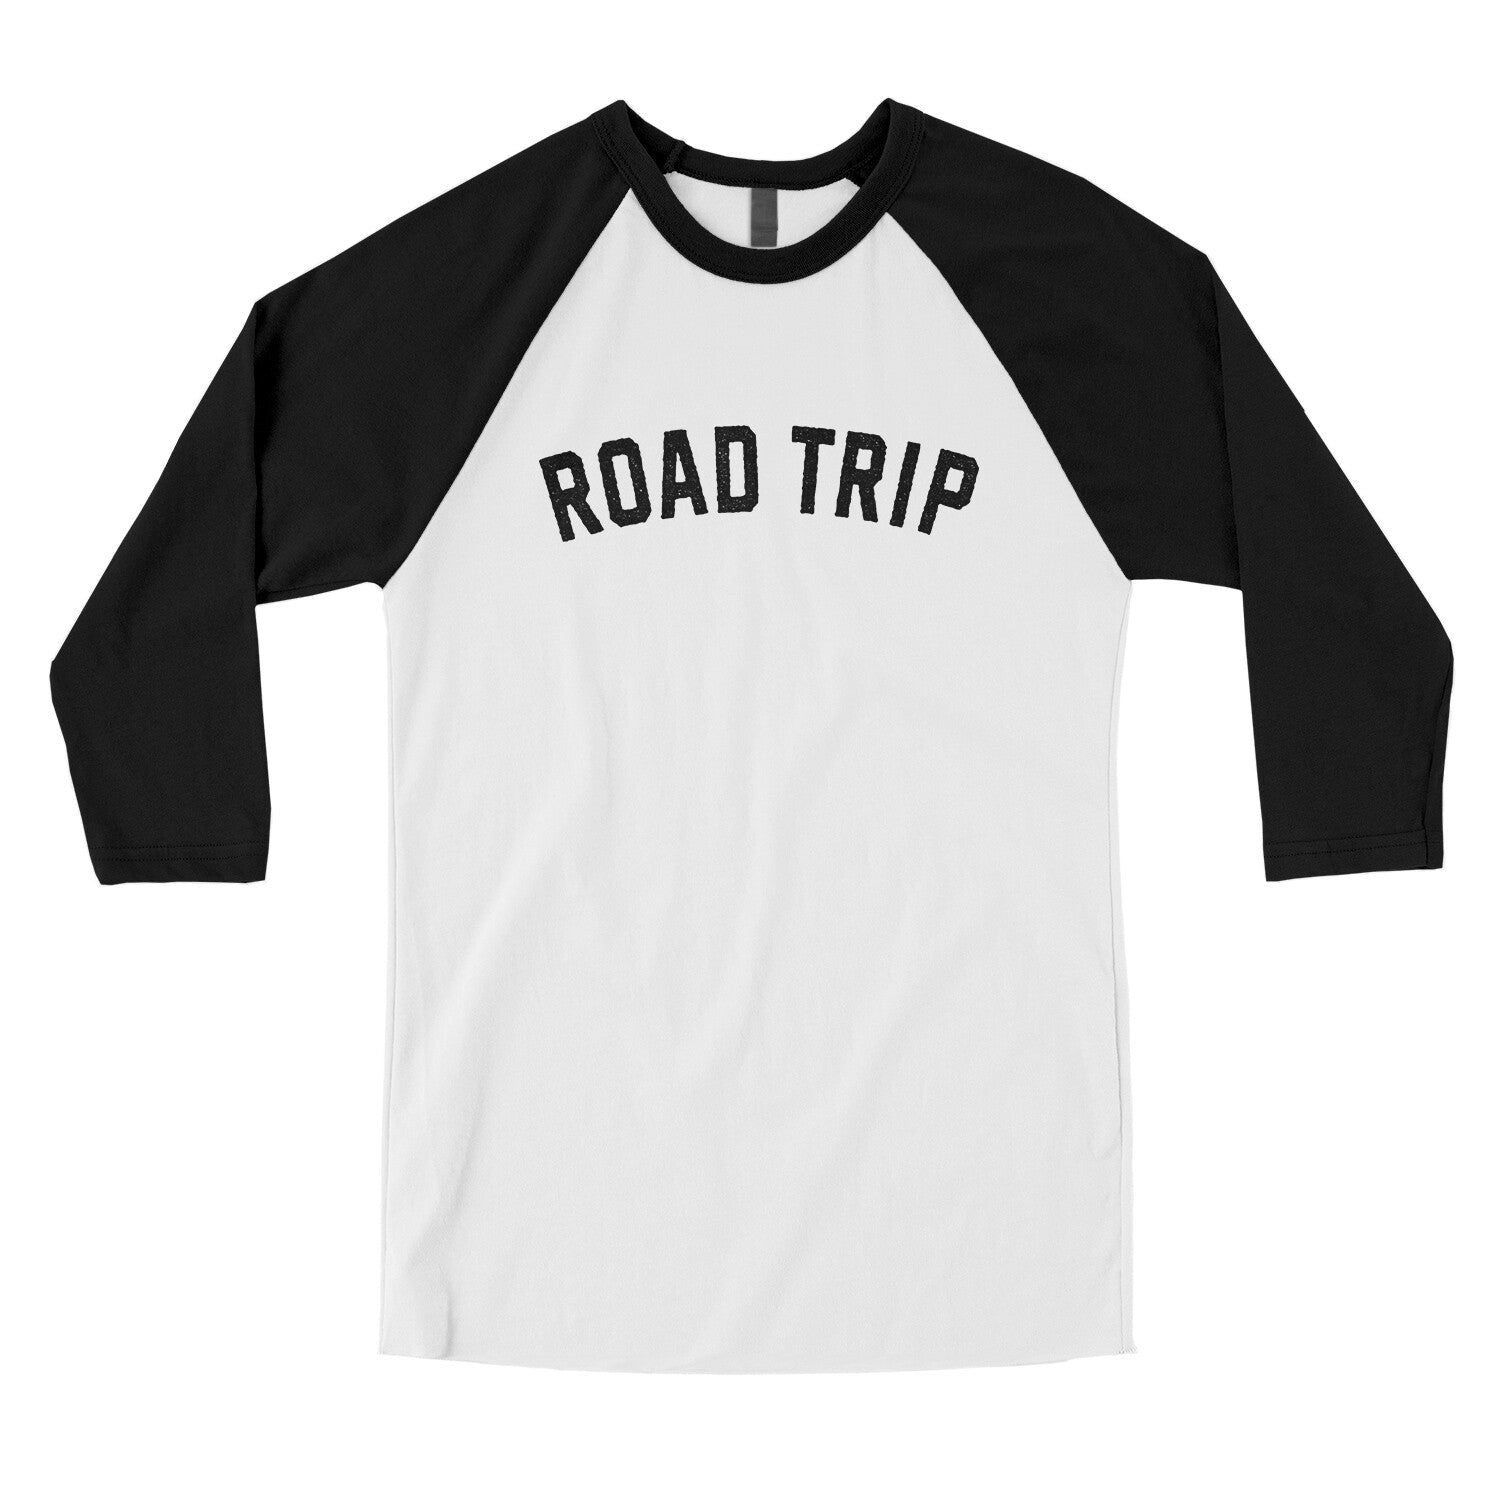 Road Trip in White with Black Color